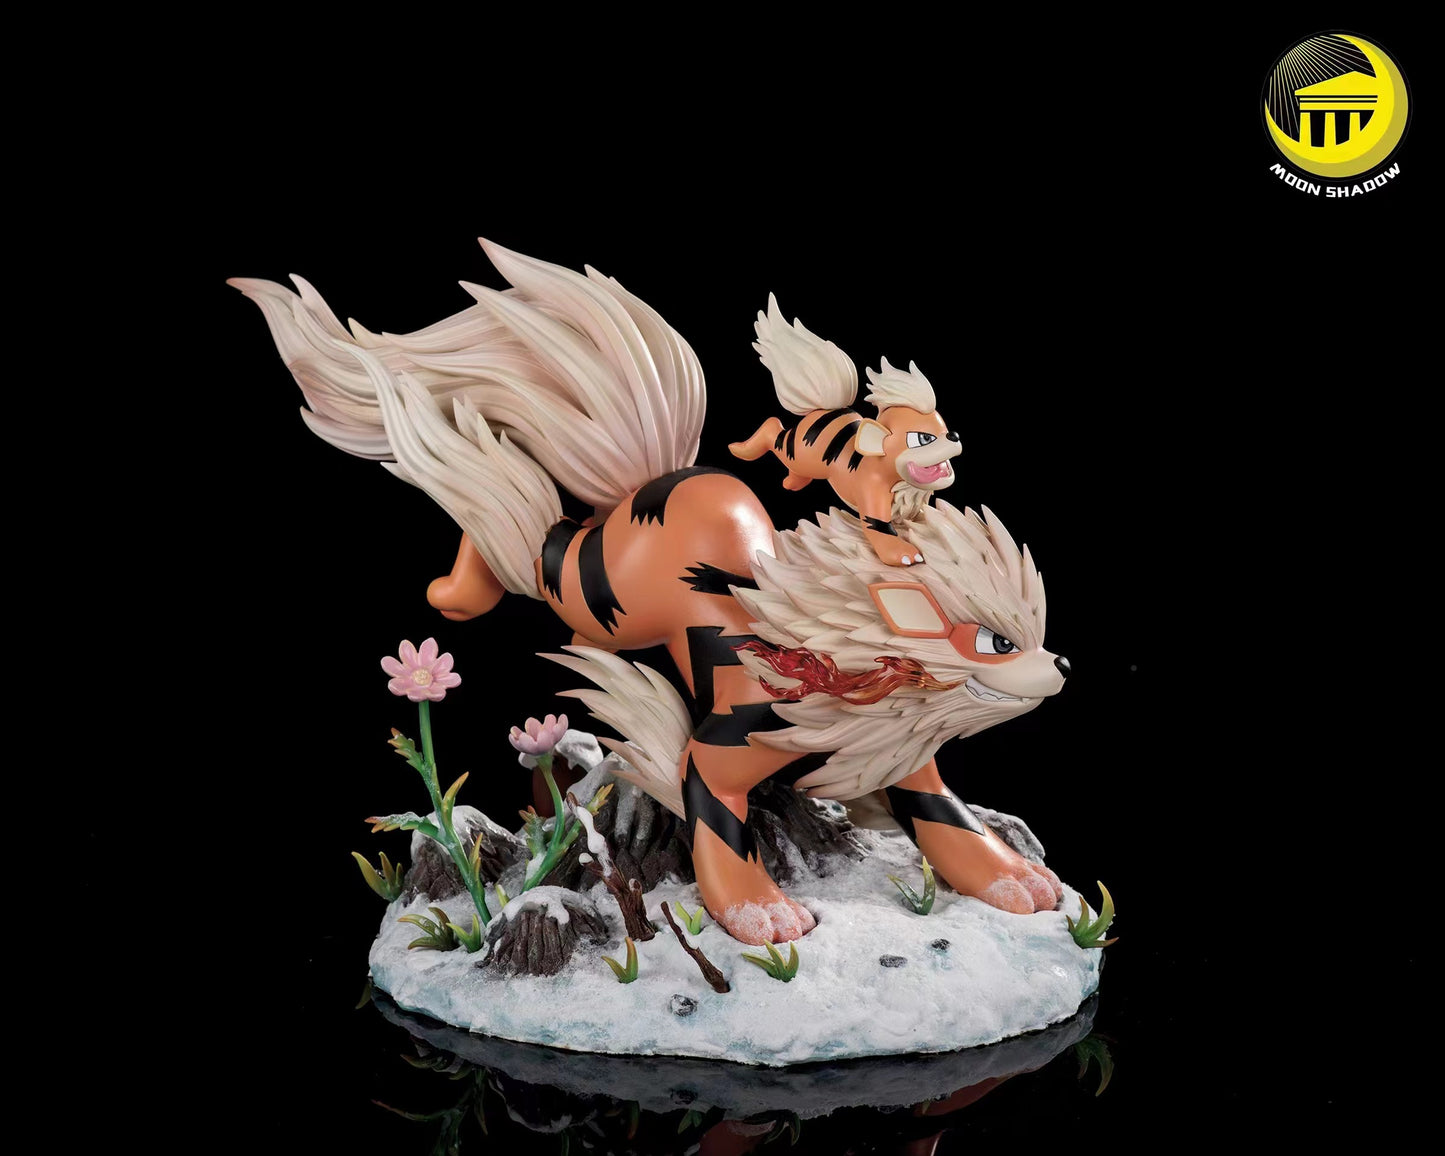 MOON SHADOW STUDIO – POKEMON: ARCANINE FAMILY [SOLD OUT]